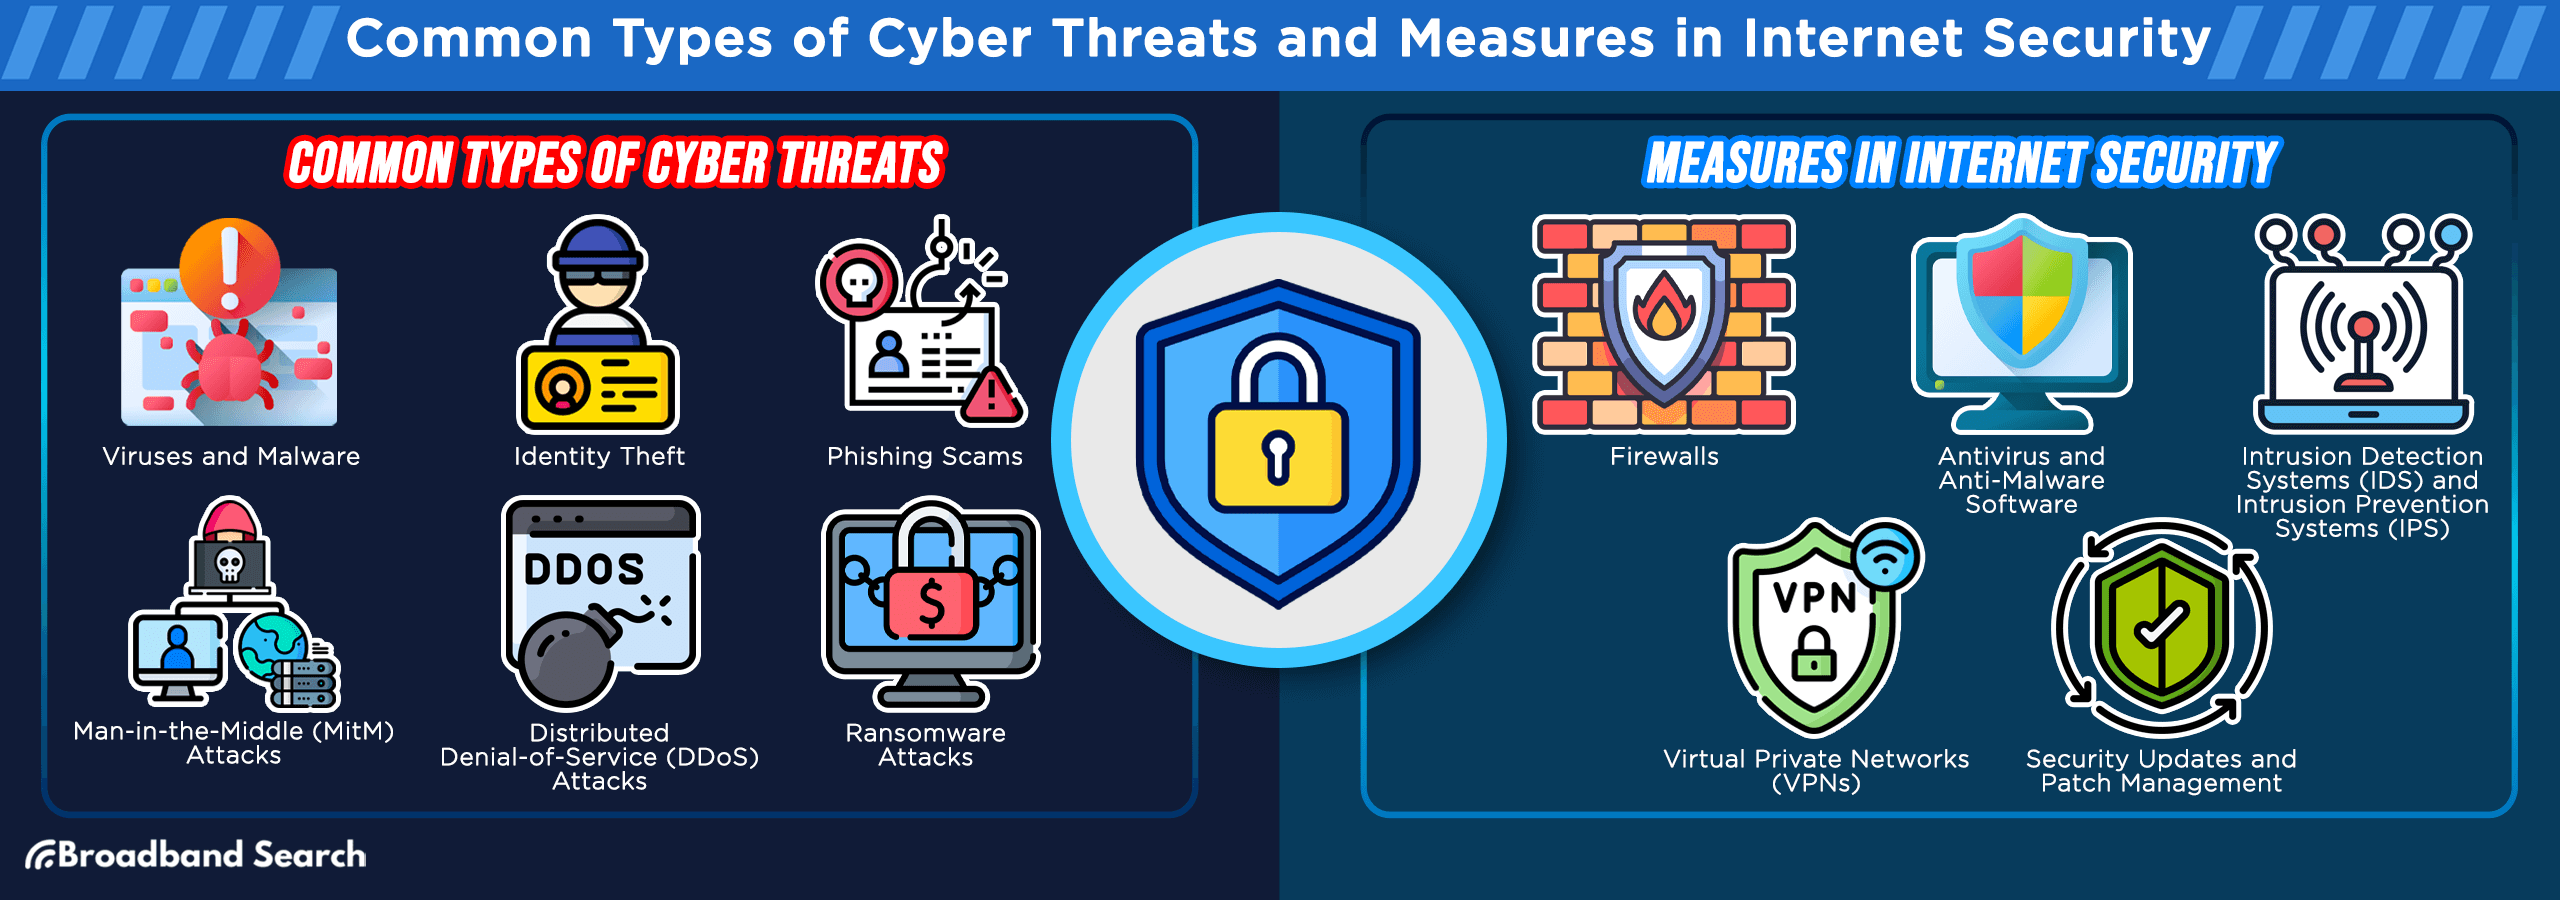 Common types of cyber threats and measures in internet security